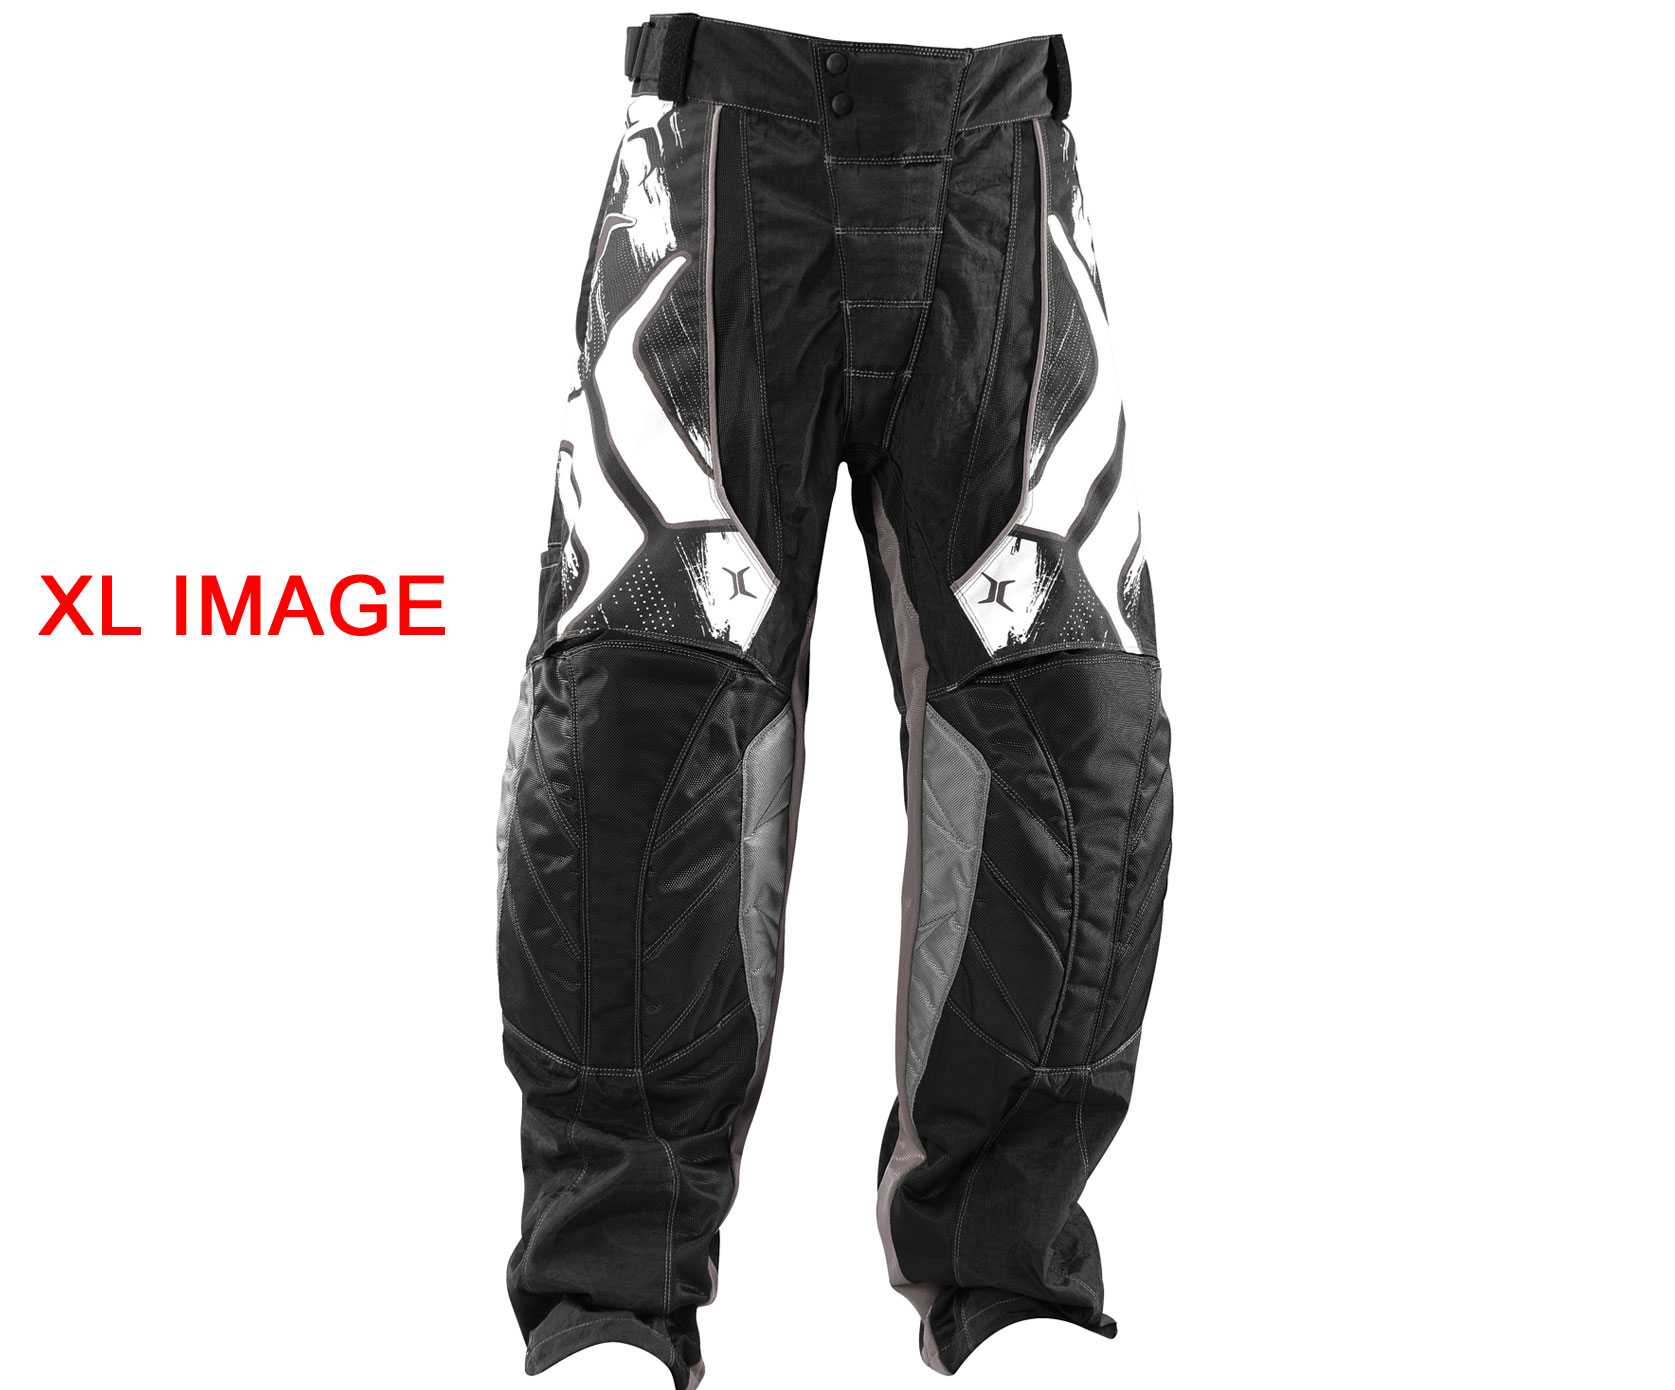 Paintball Pants, Padded Paintball Trousers | BZ Paintball